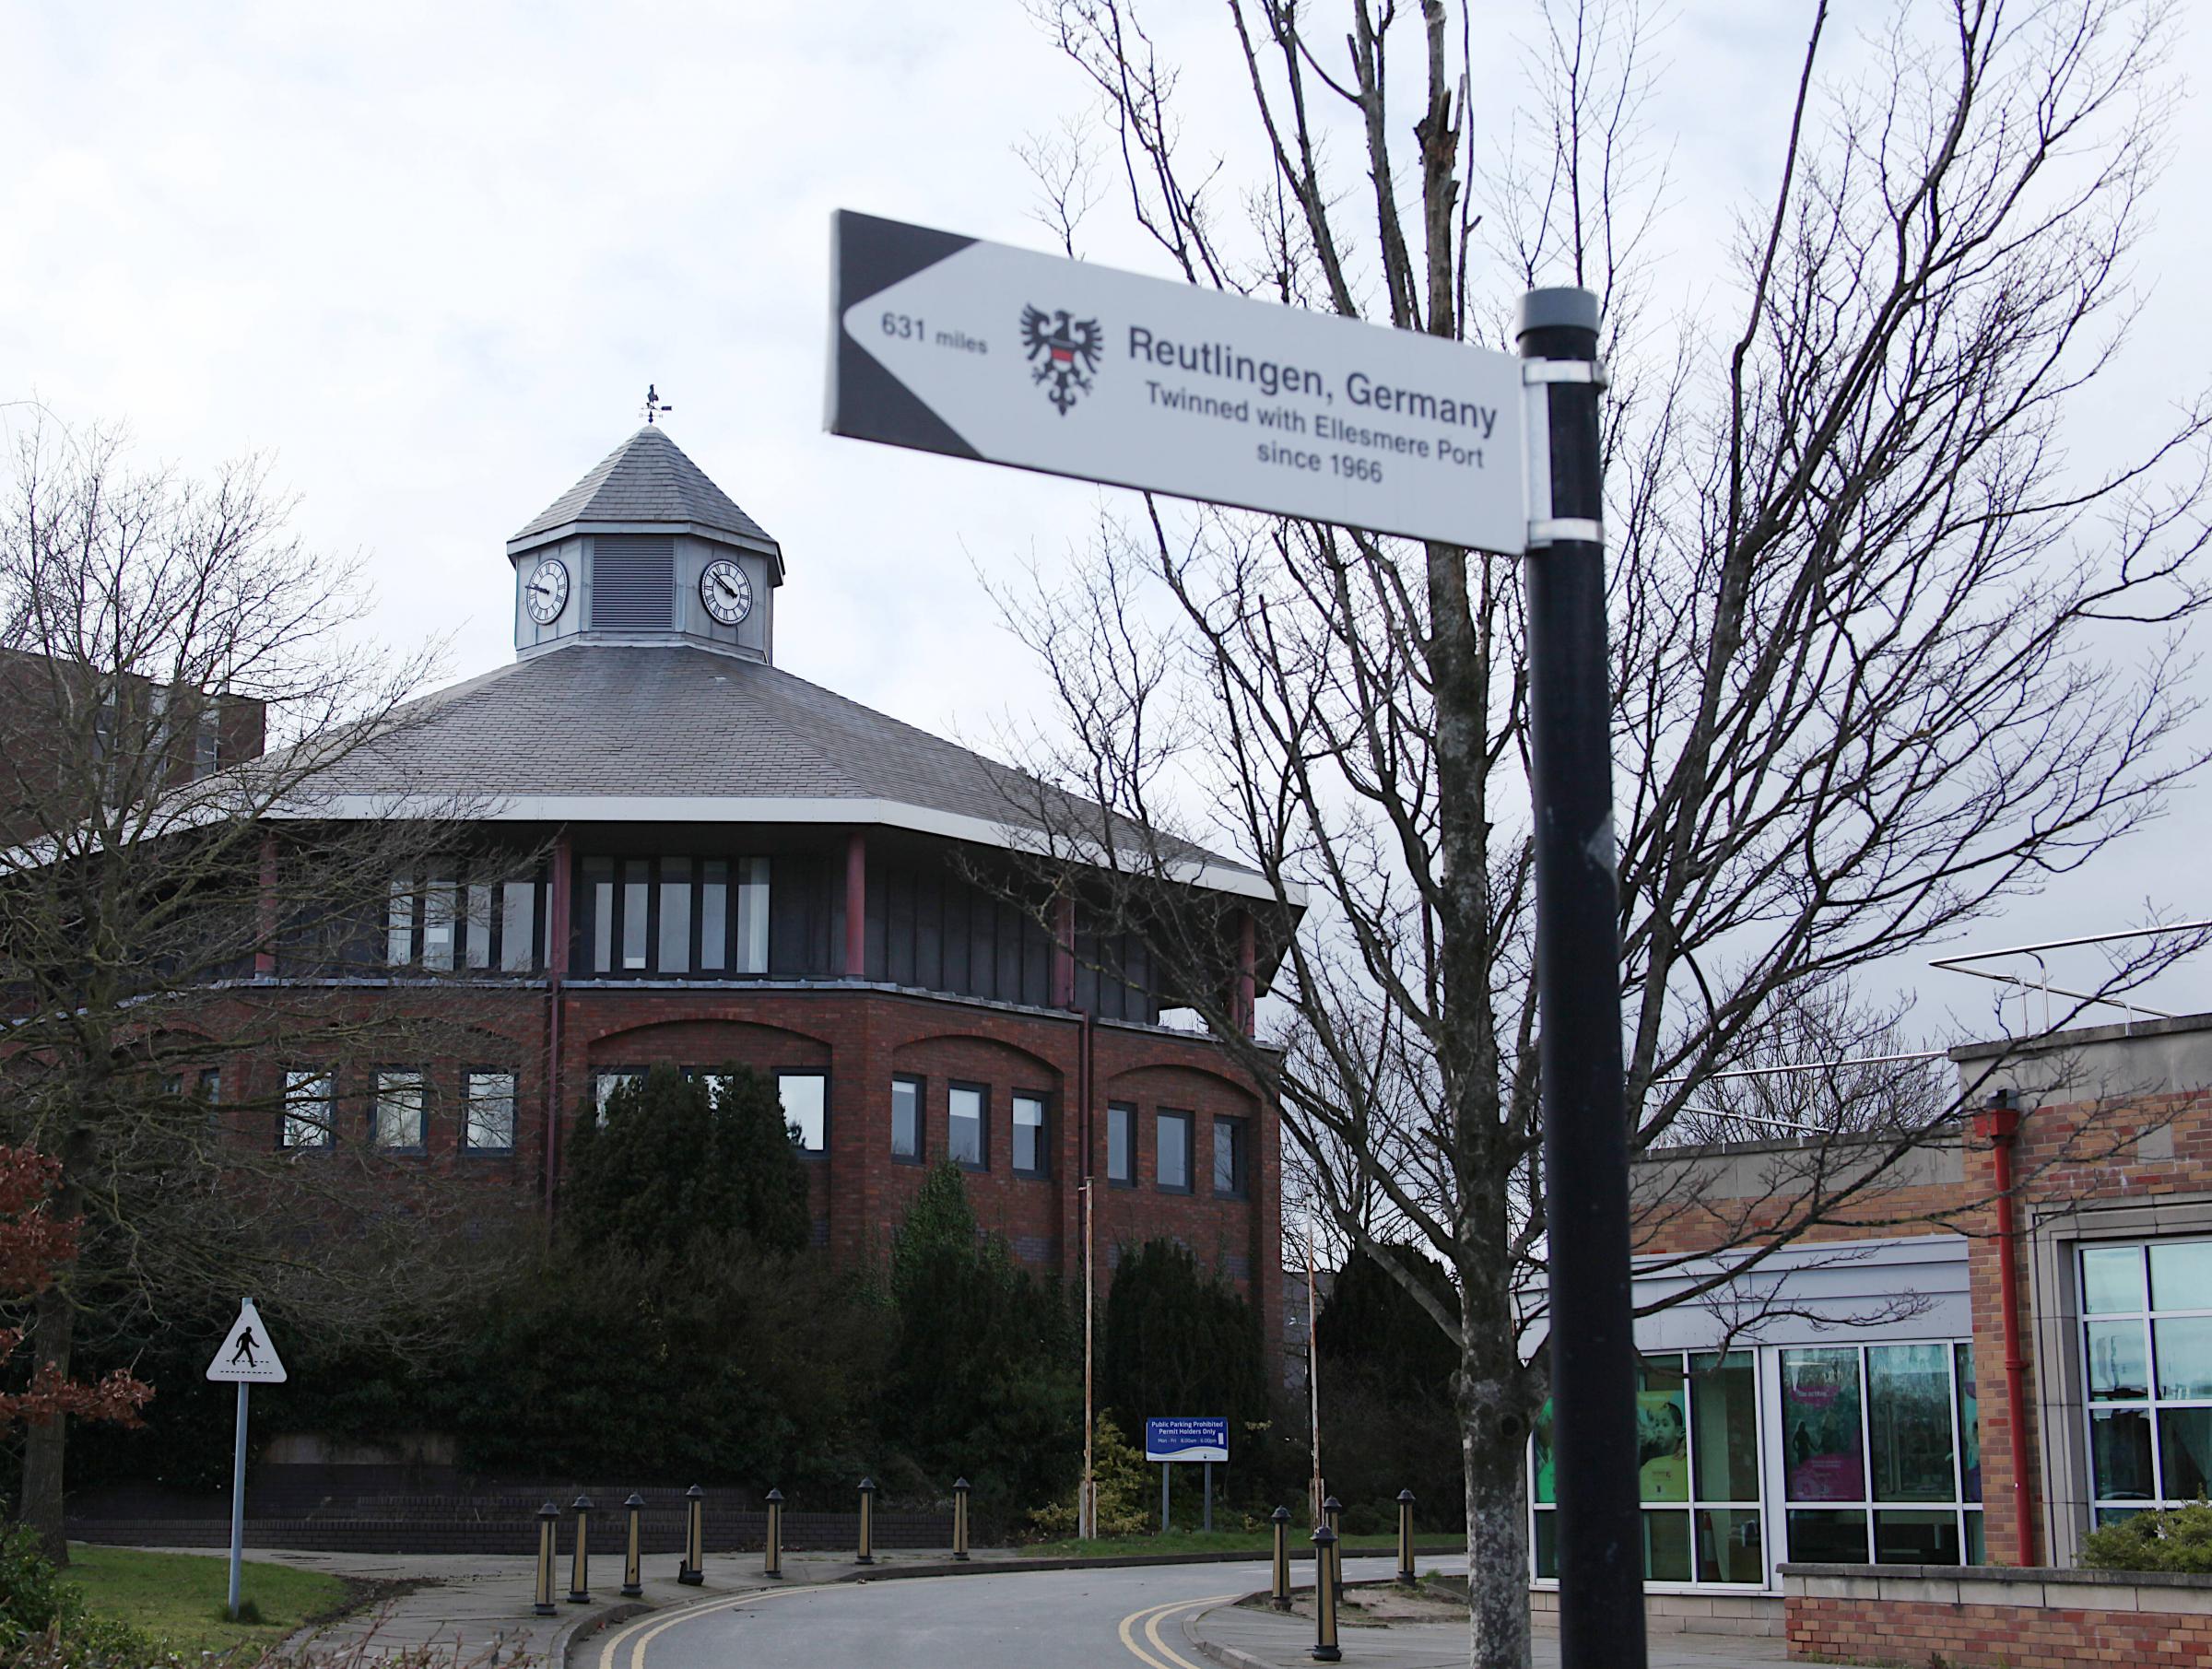 A signpost outside the old council chambers.